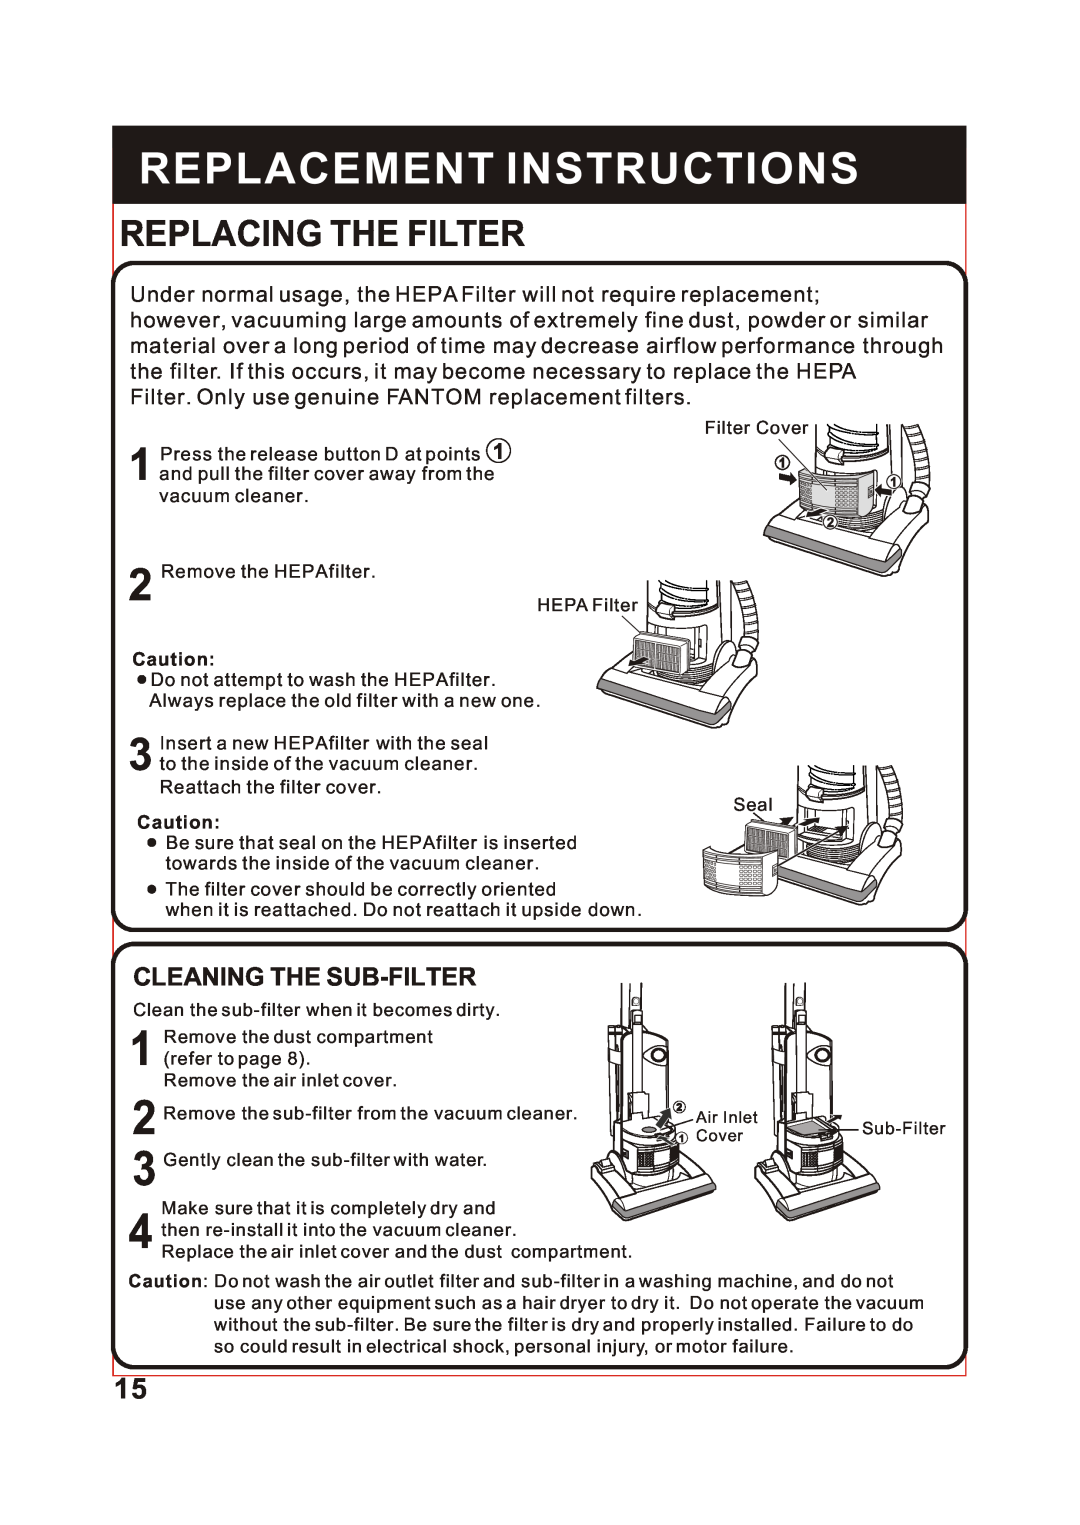 Fantom Vacuum FM741 instruction manual Replacing The Filter, Cleaning The Sub-Filter, Replacement Instructions 